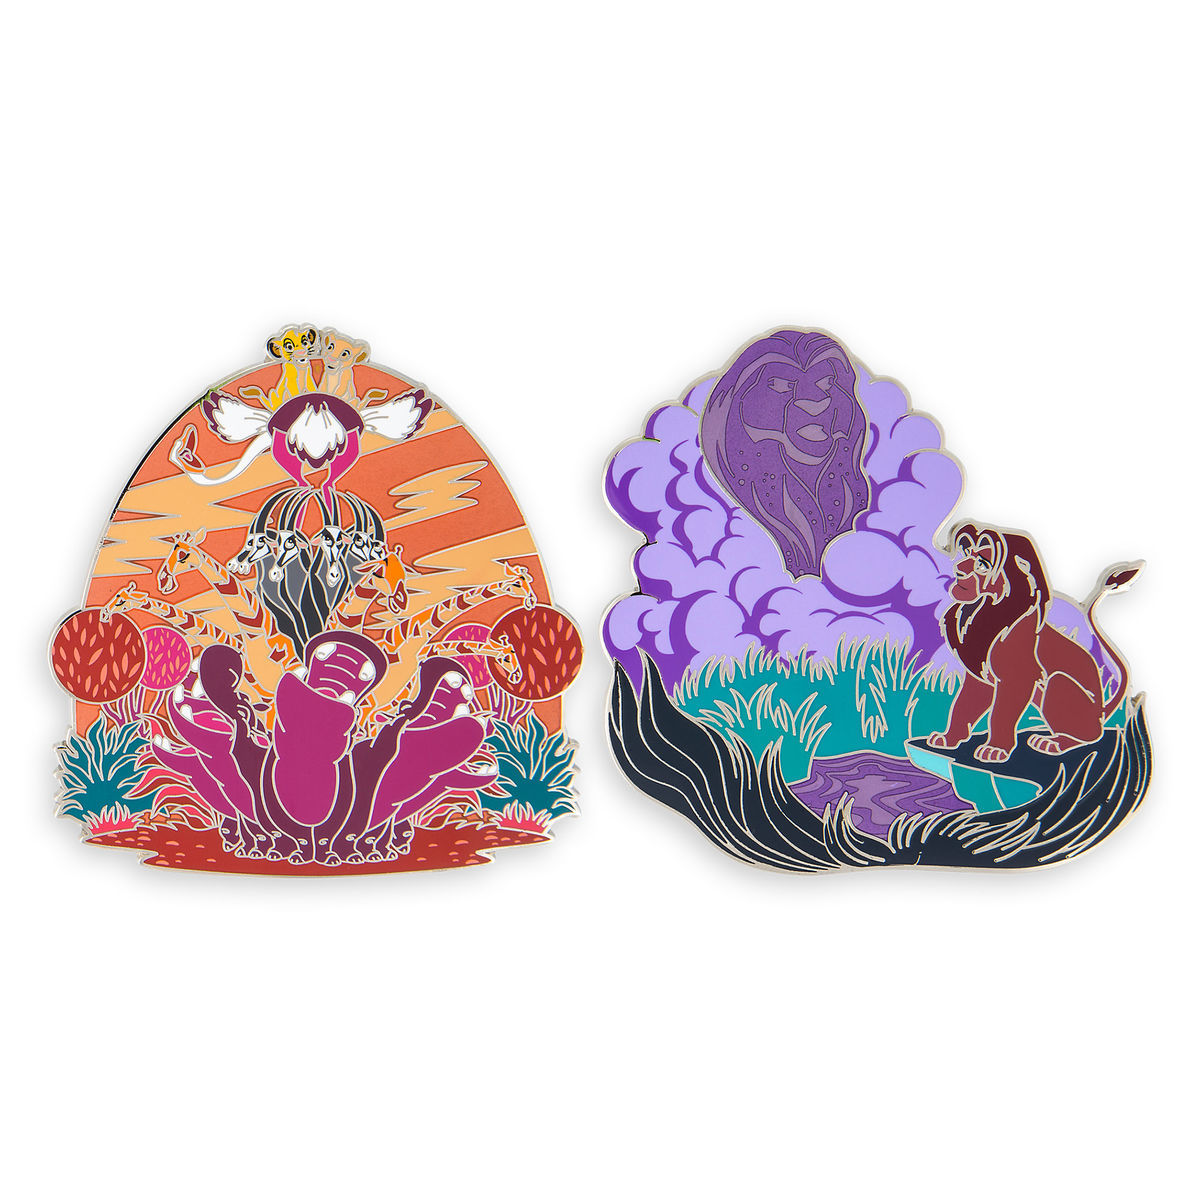 Limited Edition Lion King Pin Set Released